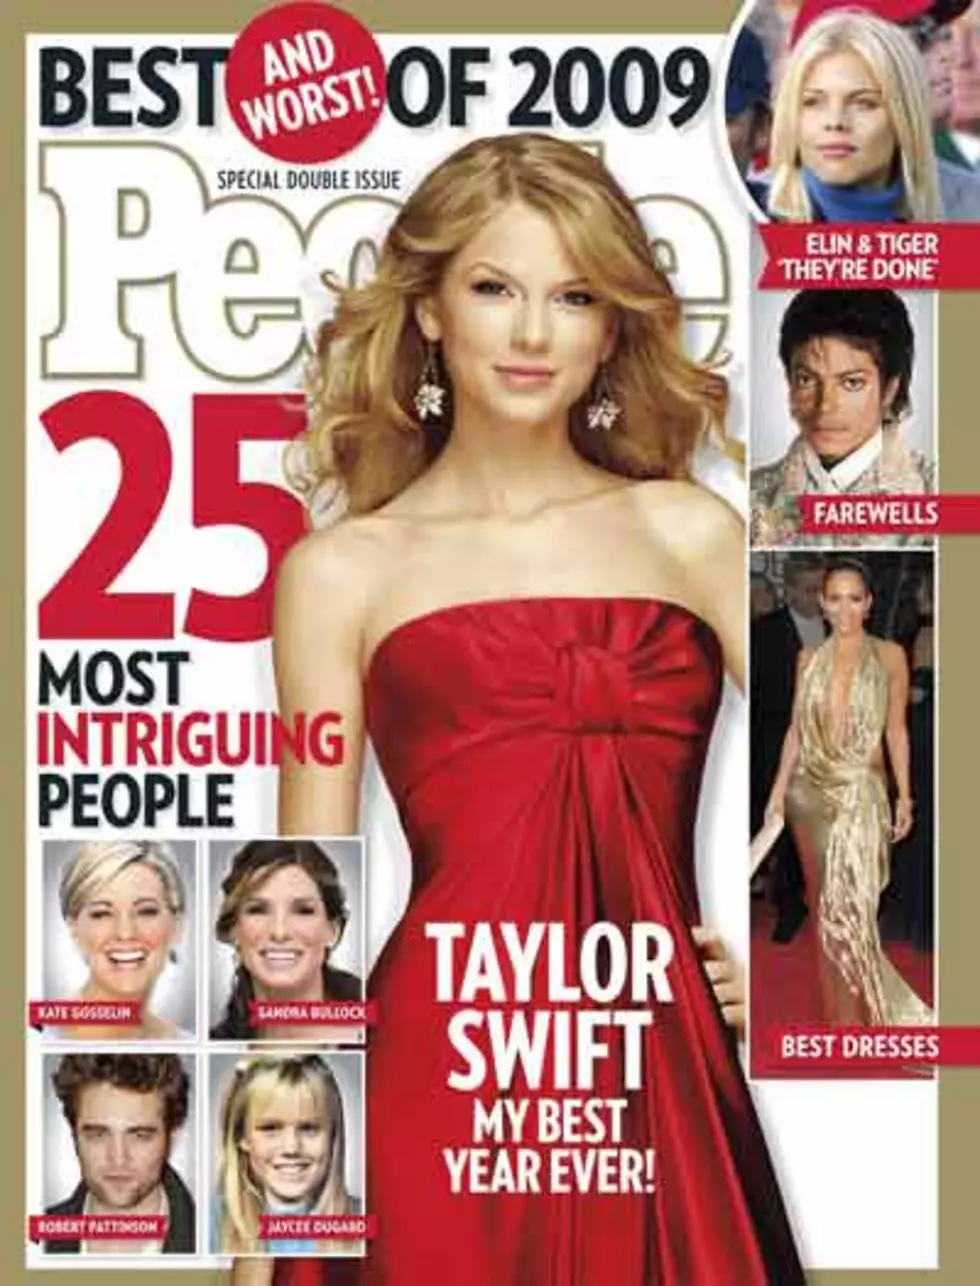 Taylor Swift Is Most Intriguing of All &#8216;PEOPLE&#8217; in 2009